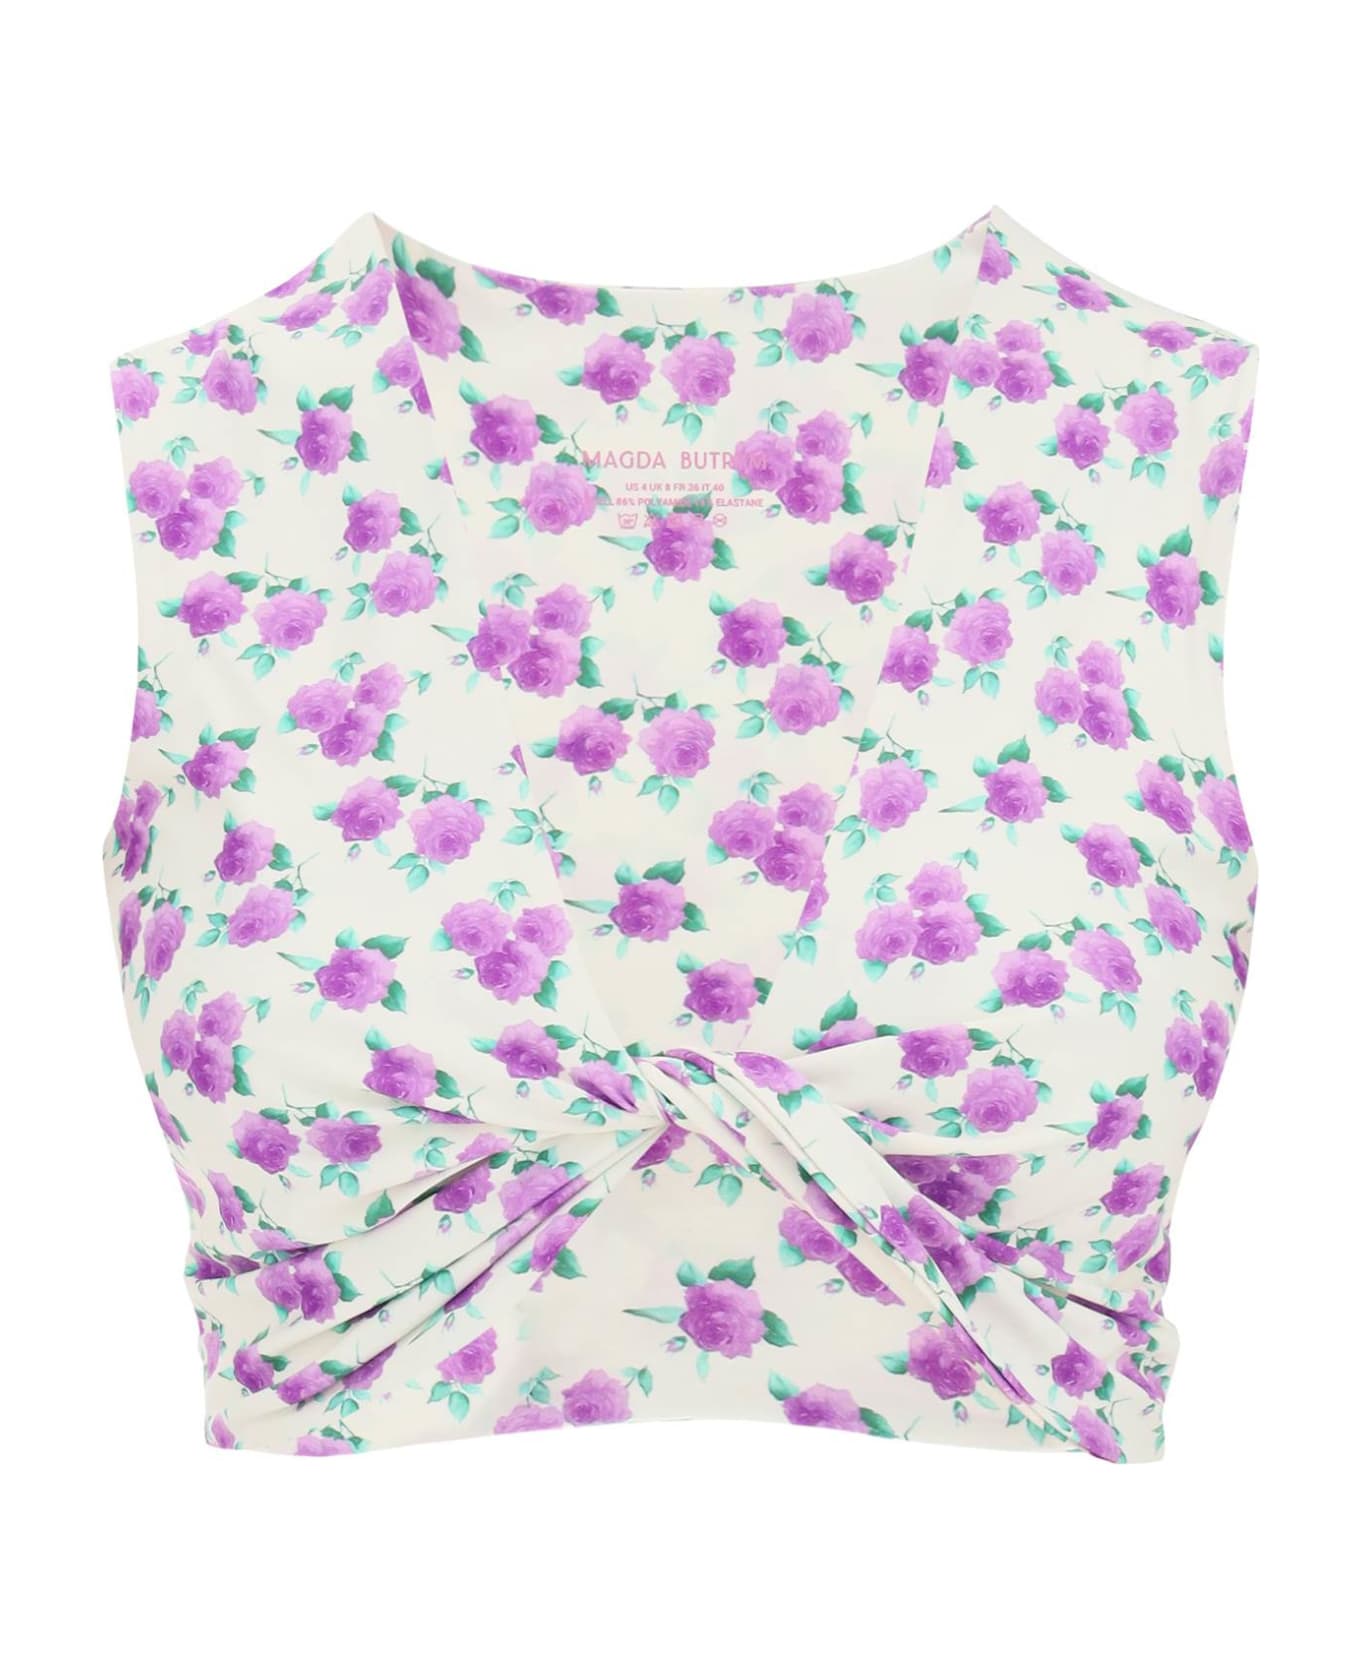 Magda Butrym Floral Printed Twisted Swim Top - VIOLET PRINT (White) トップス